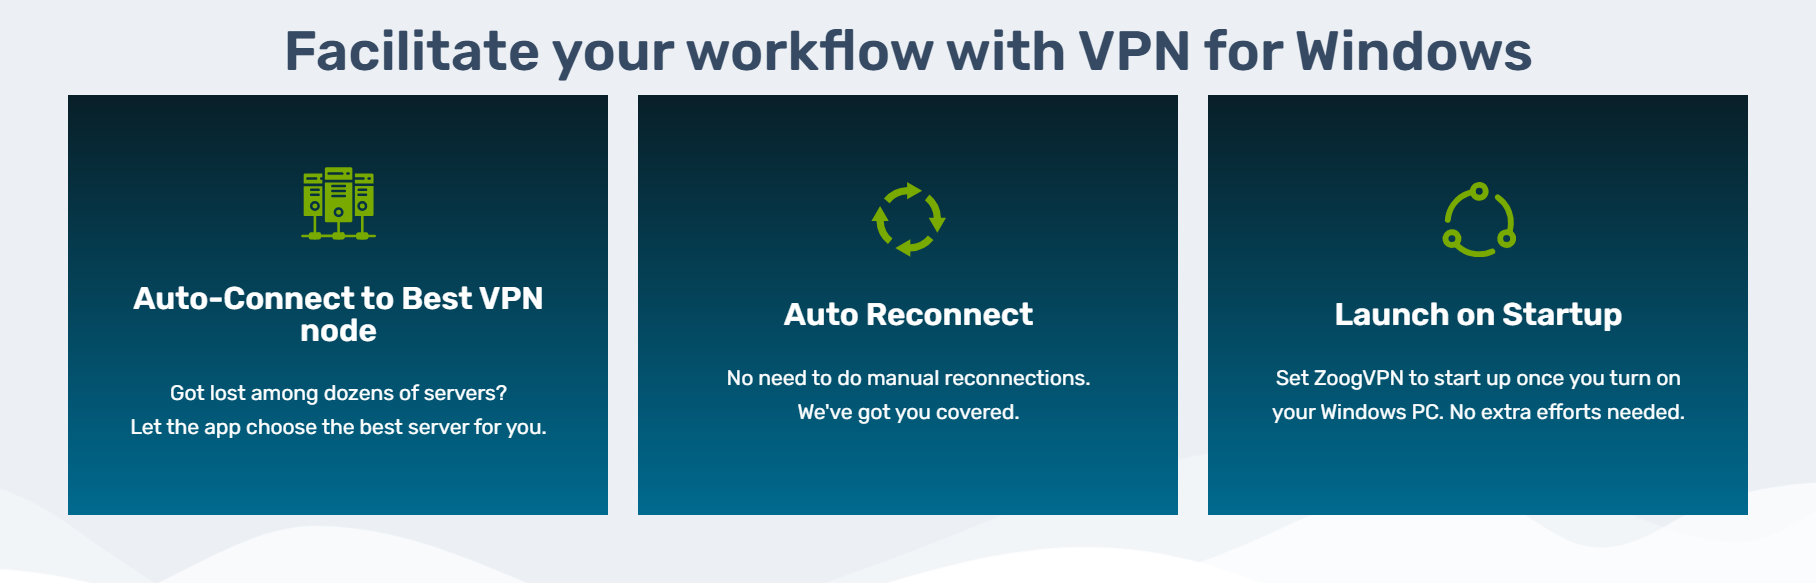 an image with information about having a vpn on windows